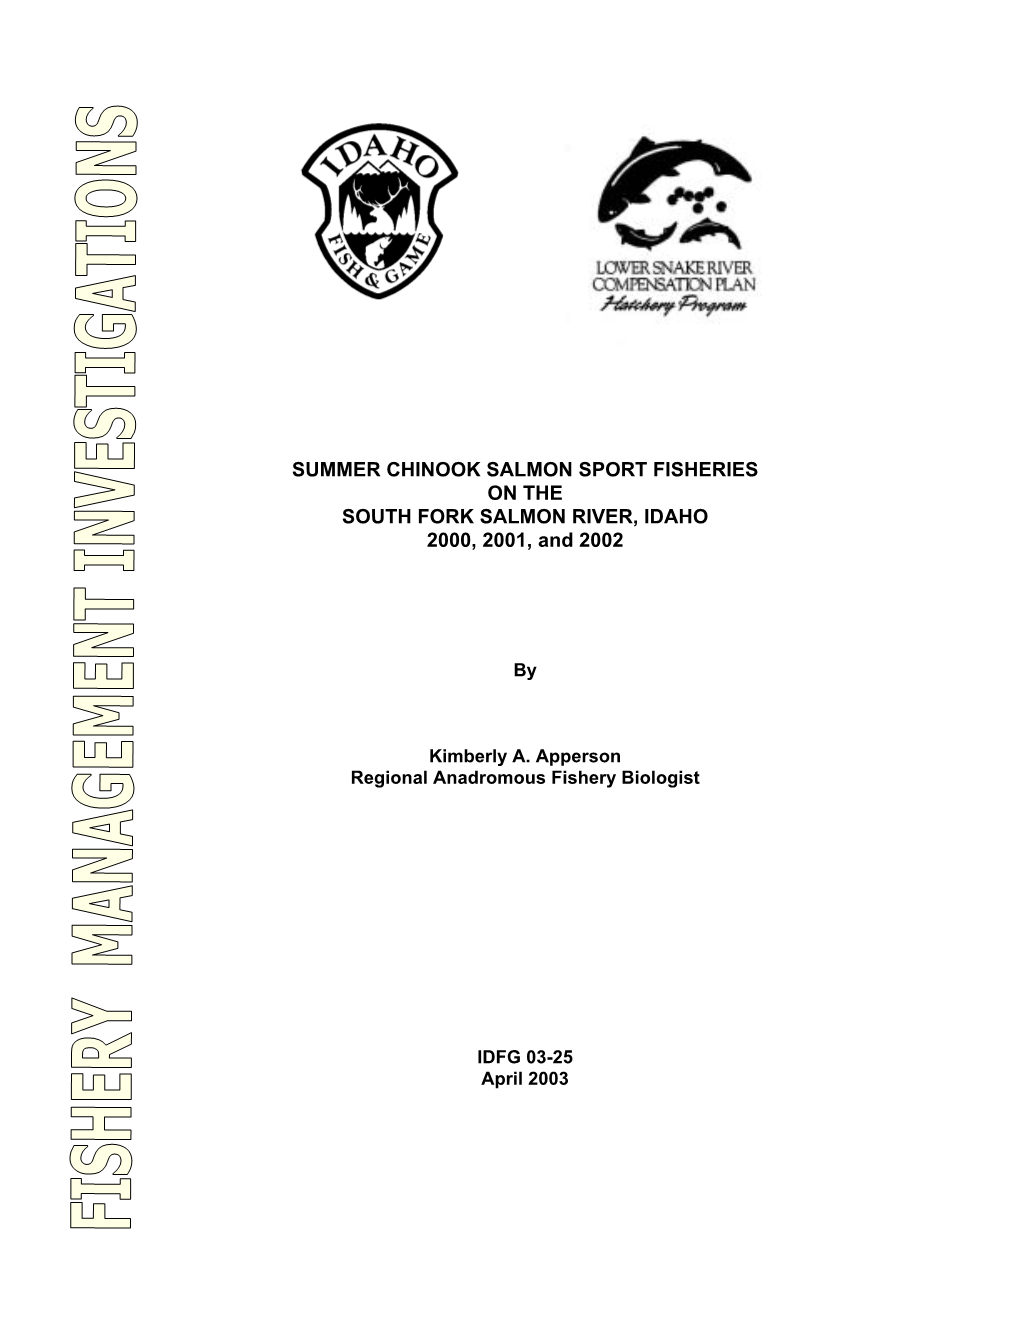 SUMMER CHINOOK SALMON SPORT FISHERIES on the SOUTH FORK SALMON RIVER, IDAHO 2000, 2001, and 2002